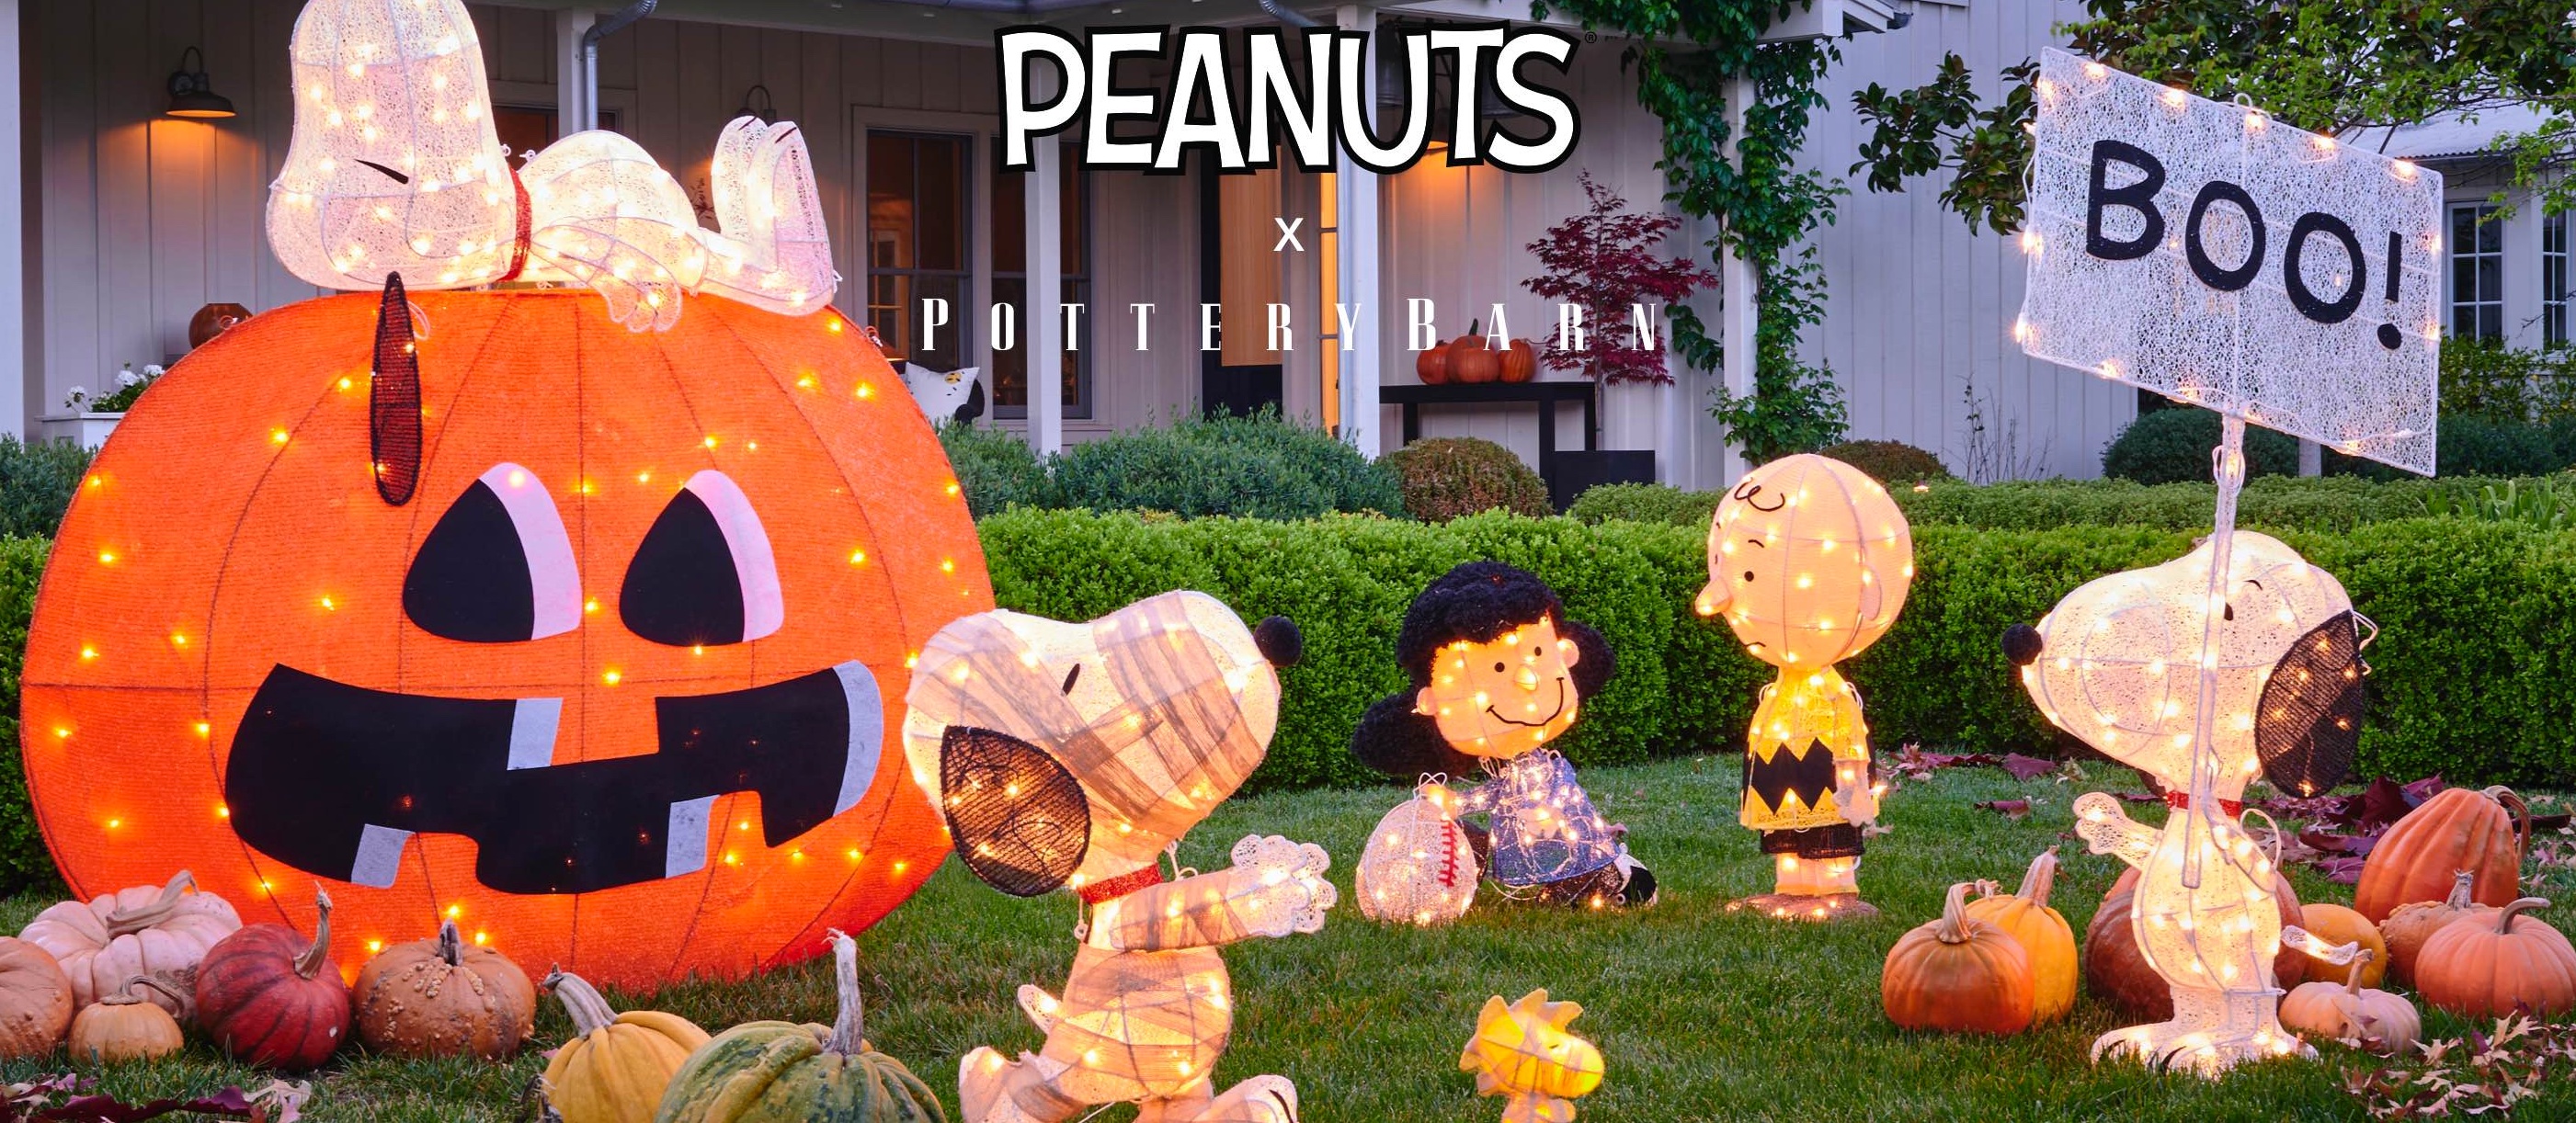 Pottery Barn x Peanuts new fall decor collection is here to spruc - 9to5Toys